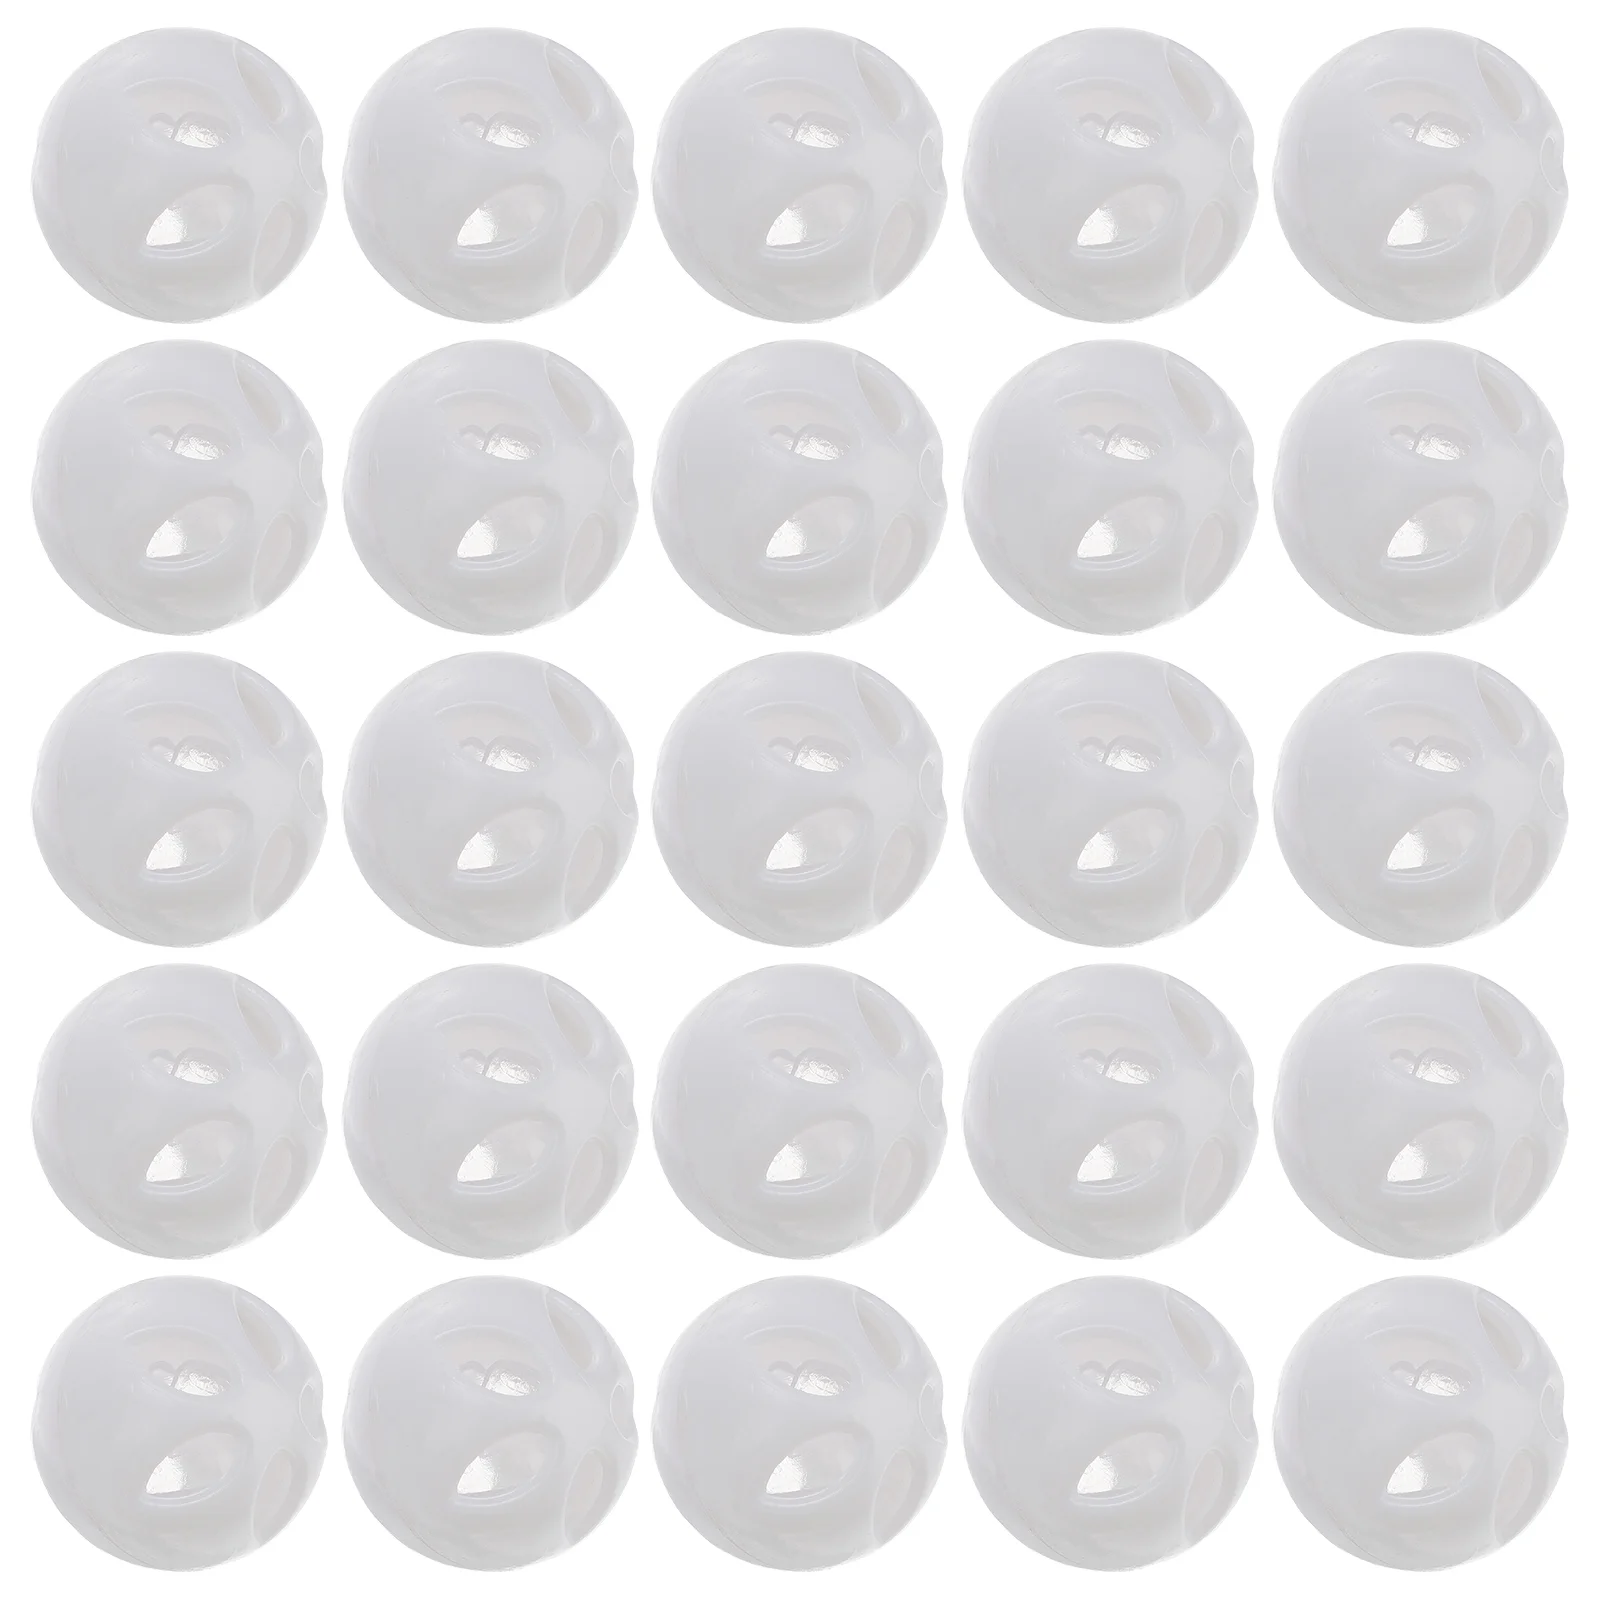 

50 PCS Singer Squeakers Repair Replacement Tool DIY Toy Insert Sound Maker Pet Plastic Noise Child Shaking Accessories